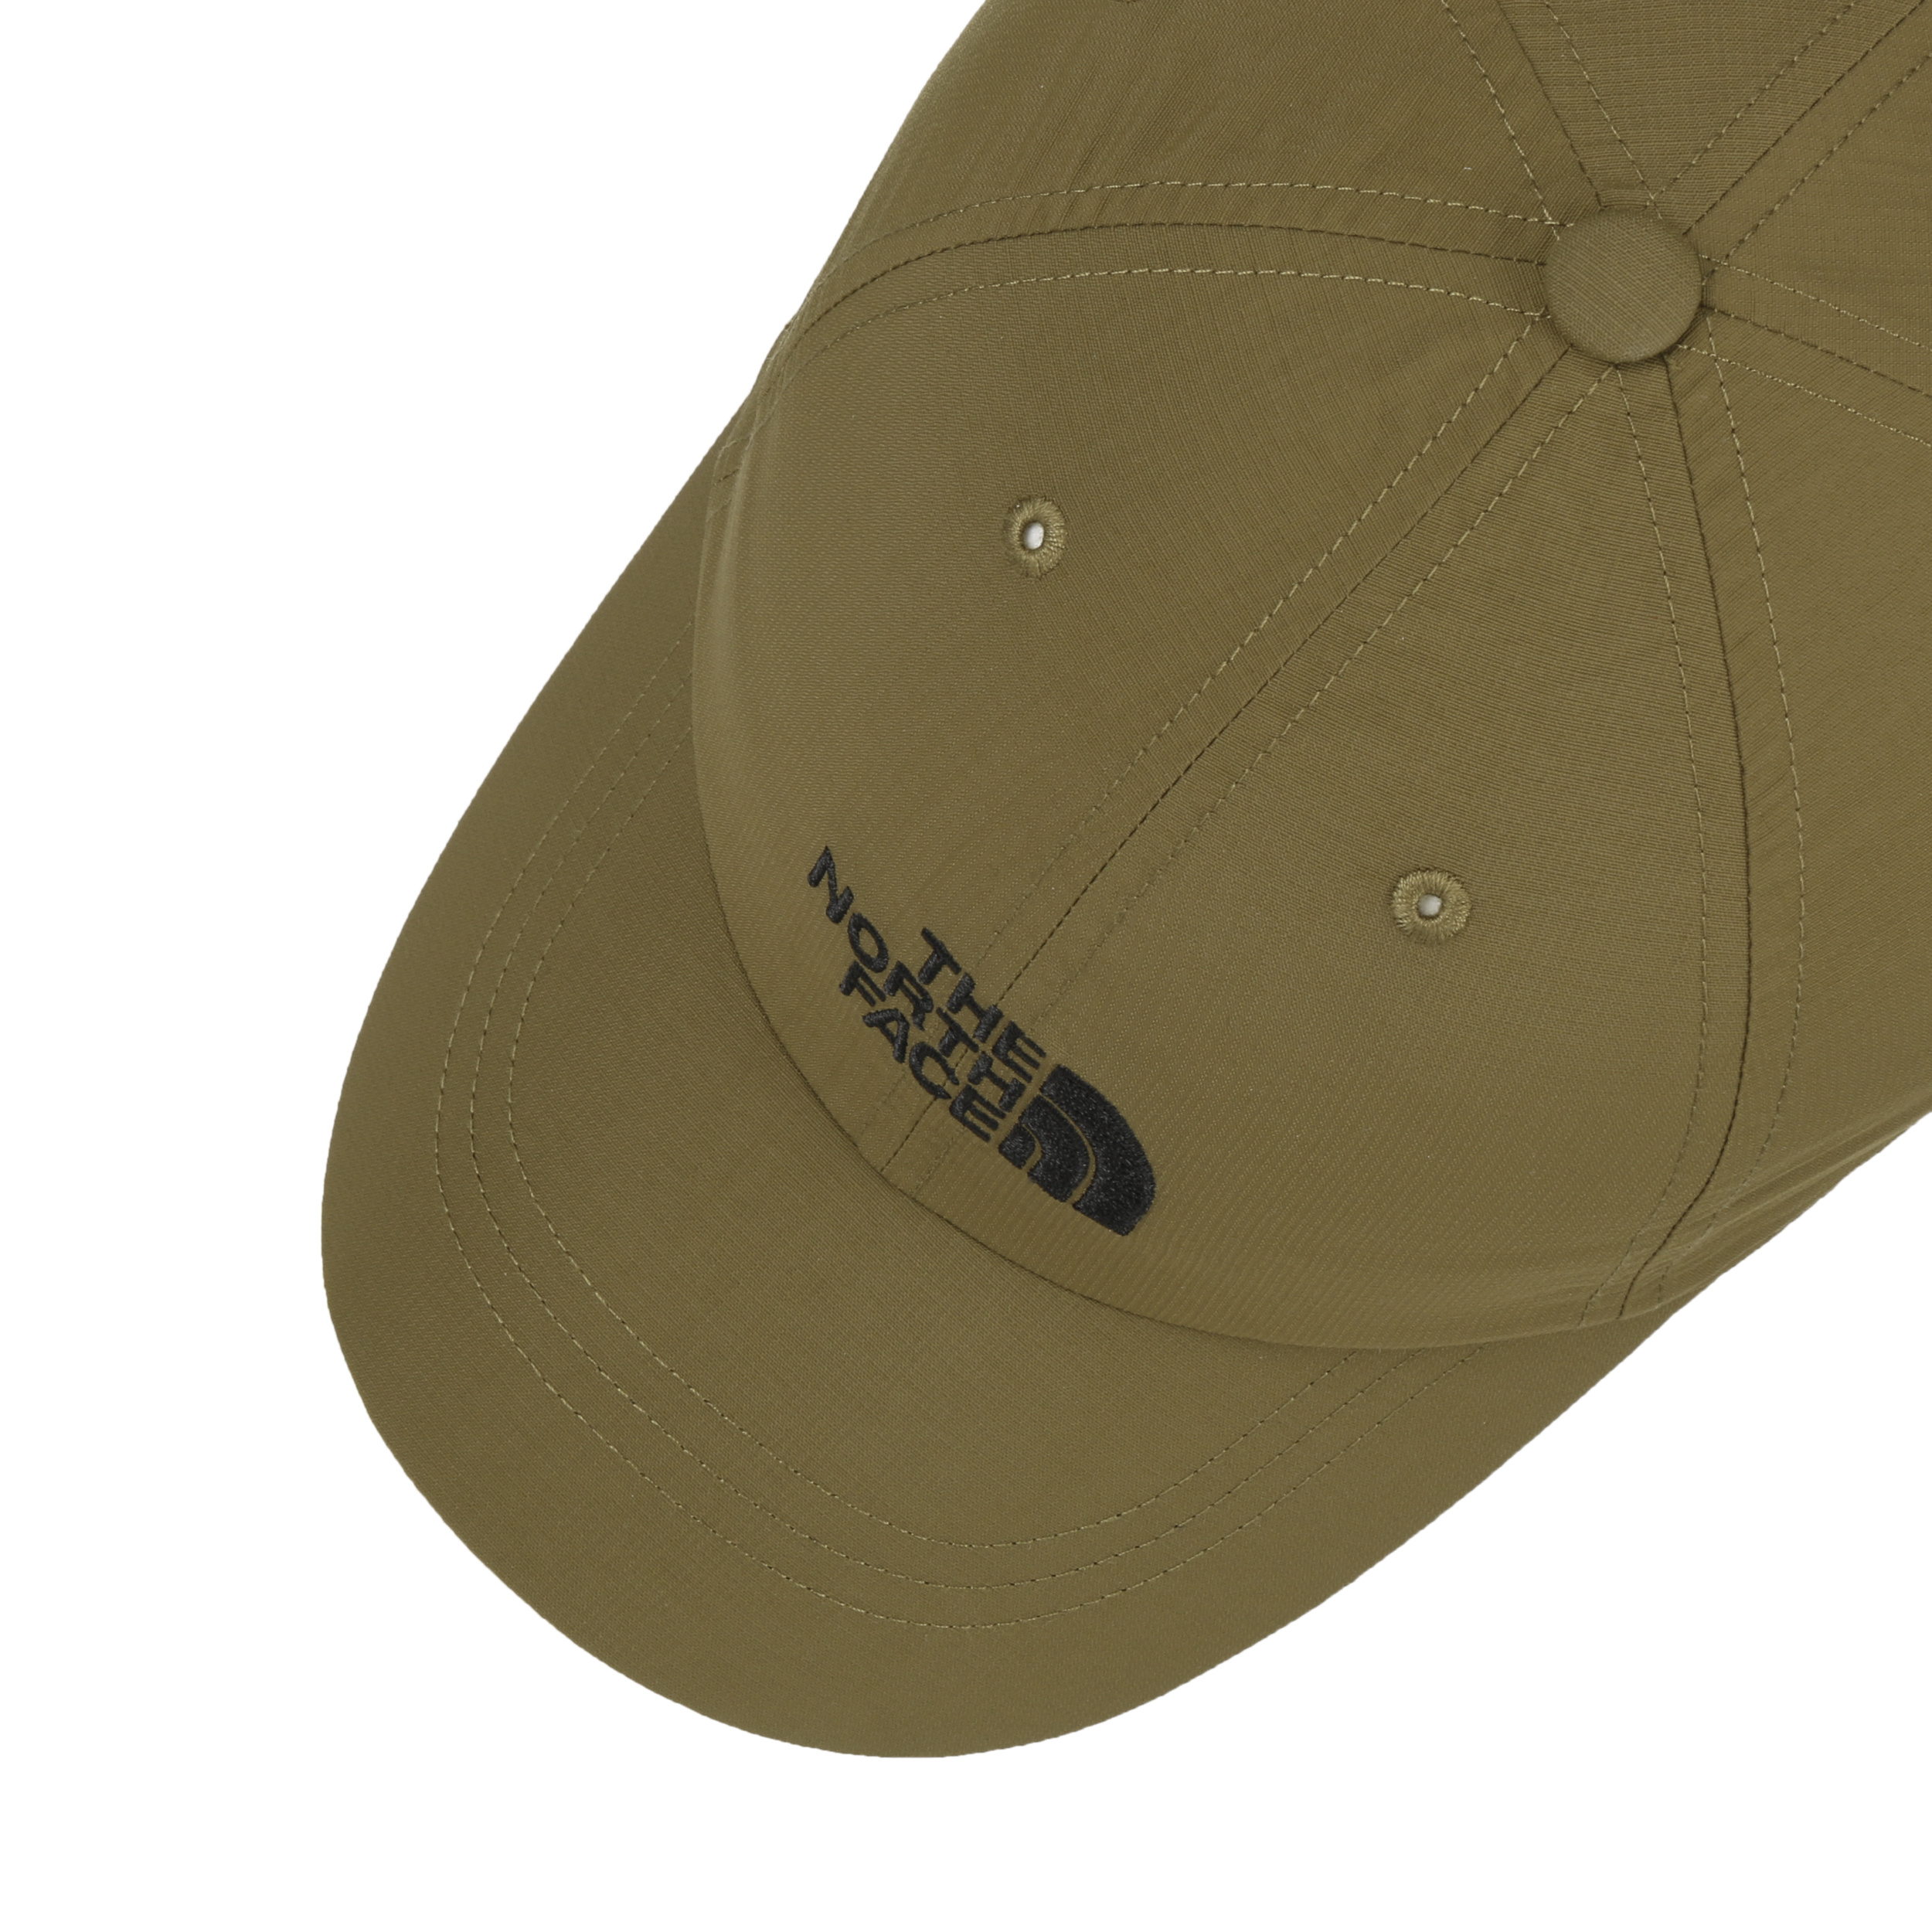 Horizon Cap by Face The 29,95 - North €